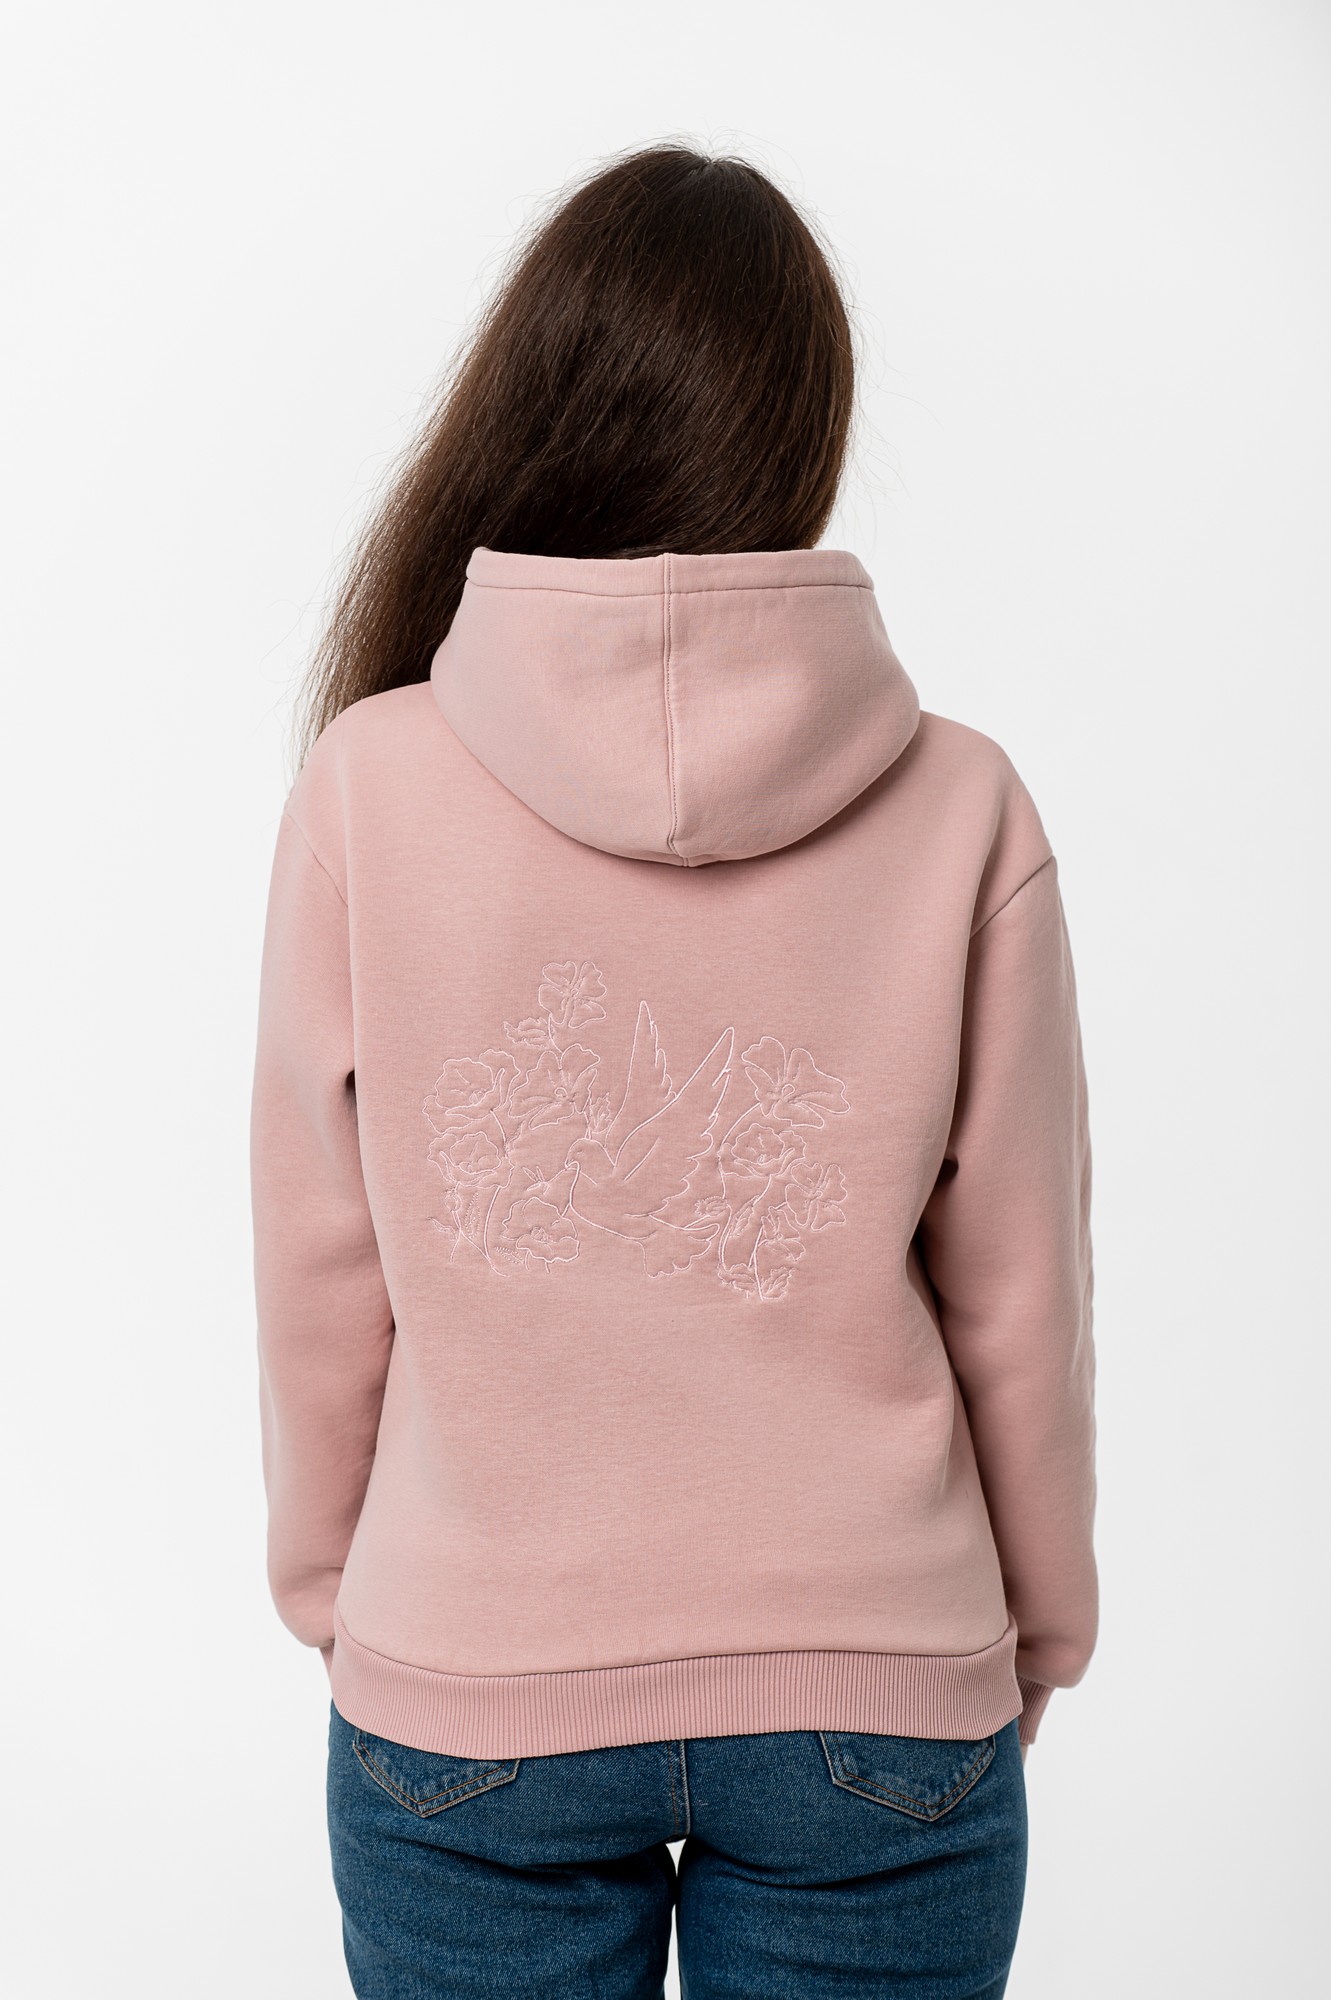 Women's hoodie with embroidery "Dove of peace" pink